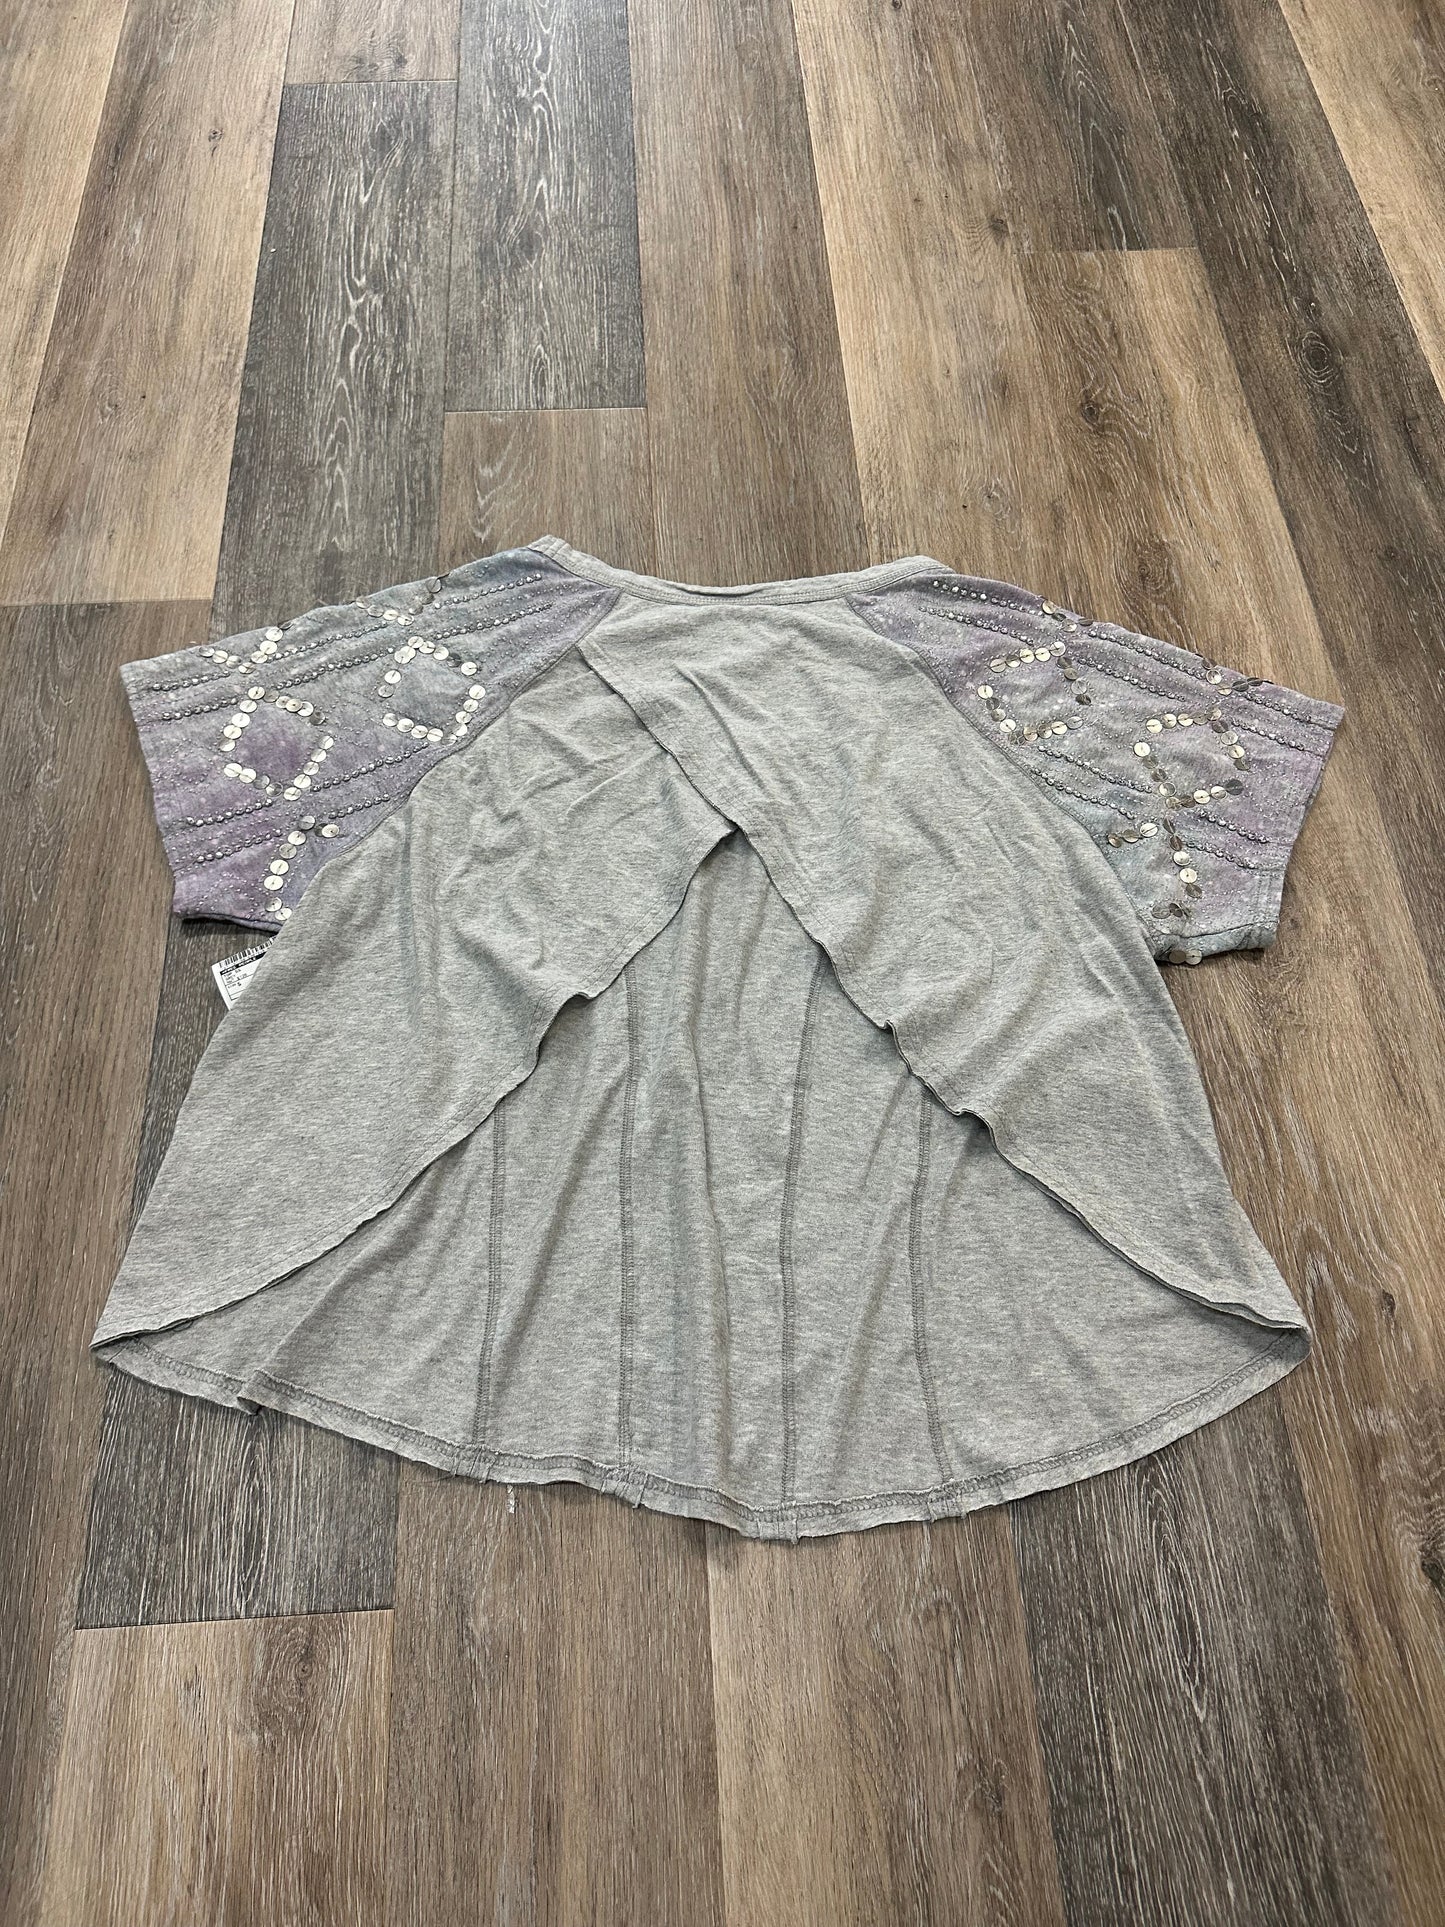 Grey Top Short Sleeve Free People, Size S